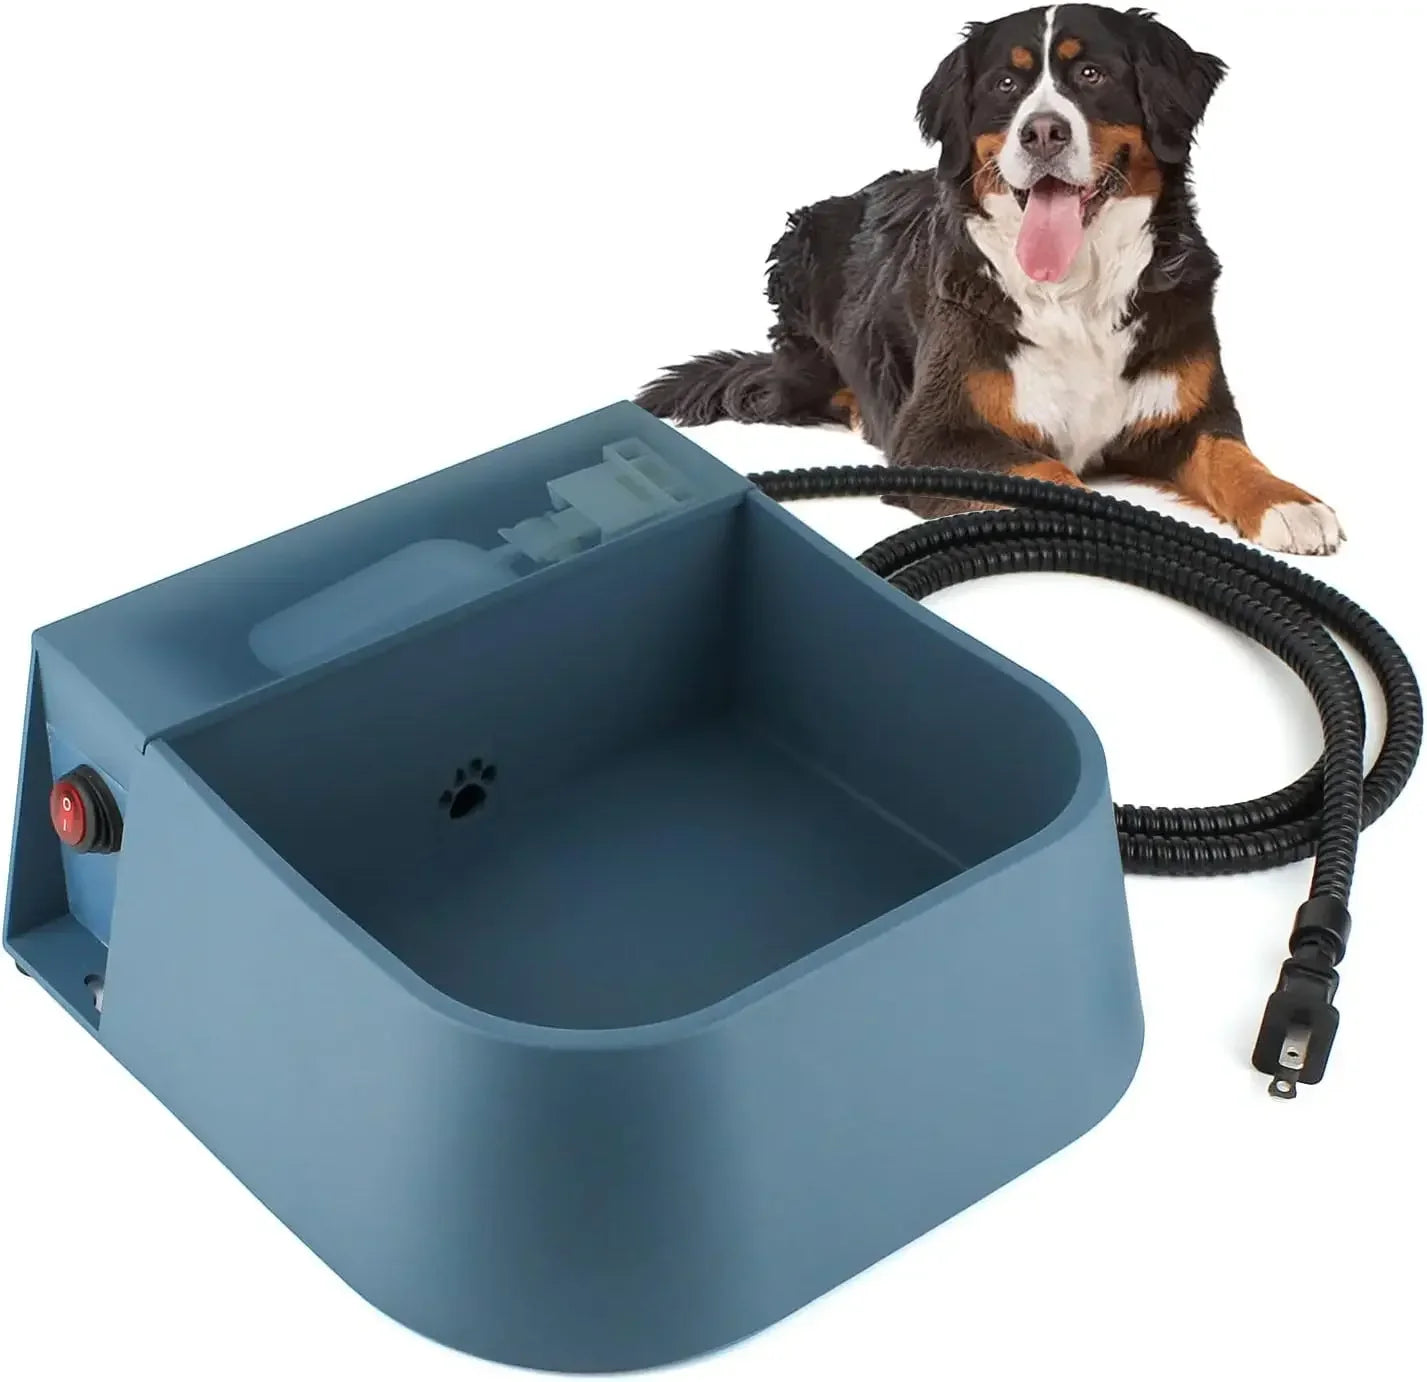 AutomaticBowl Dog Auto Dog,cats,chickens,animals Filling Heated for Outdoor Dogs,heated Water Bowl,heated Waterer Automatic